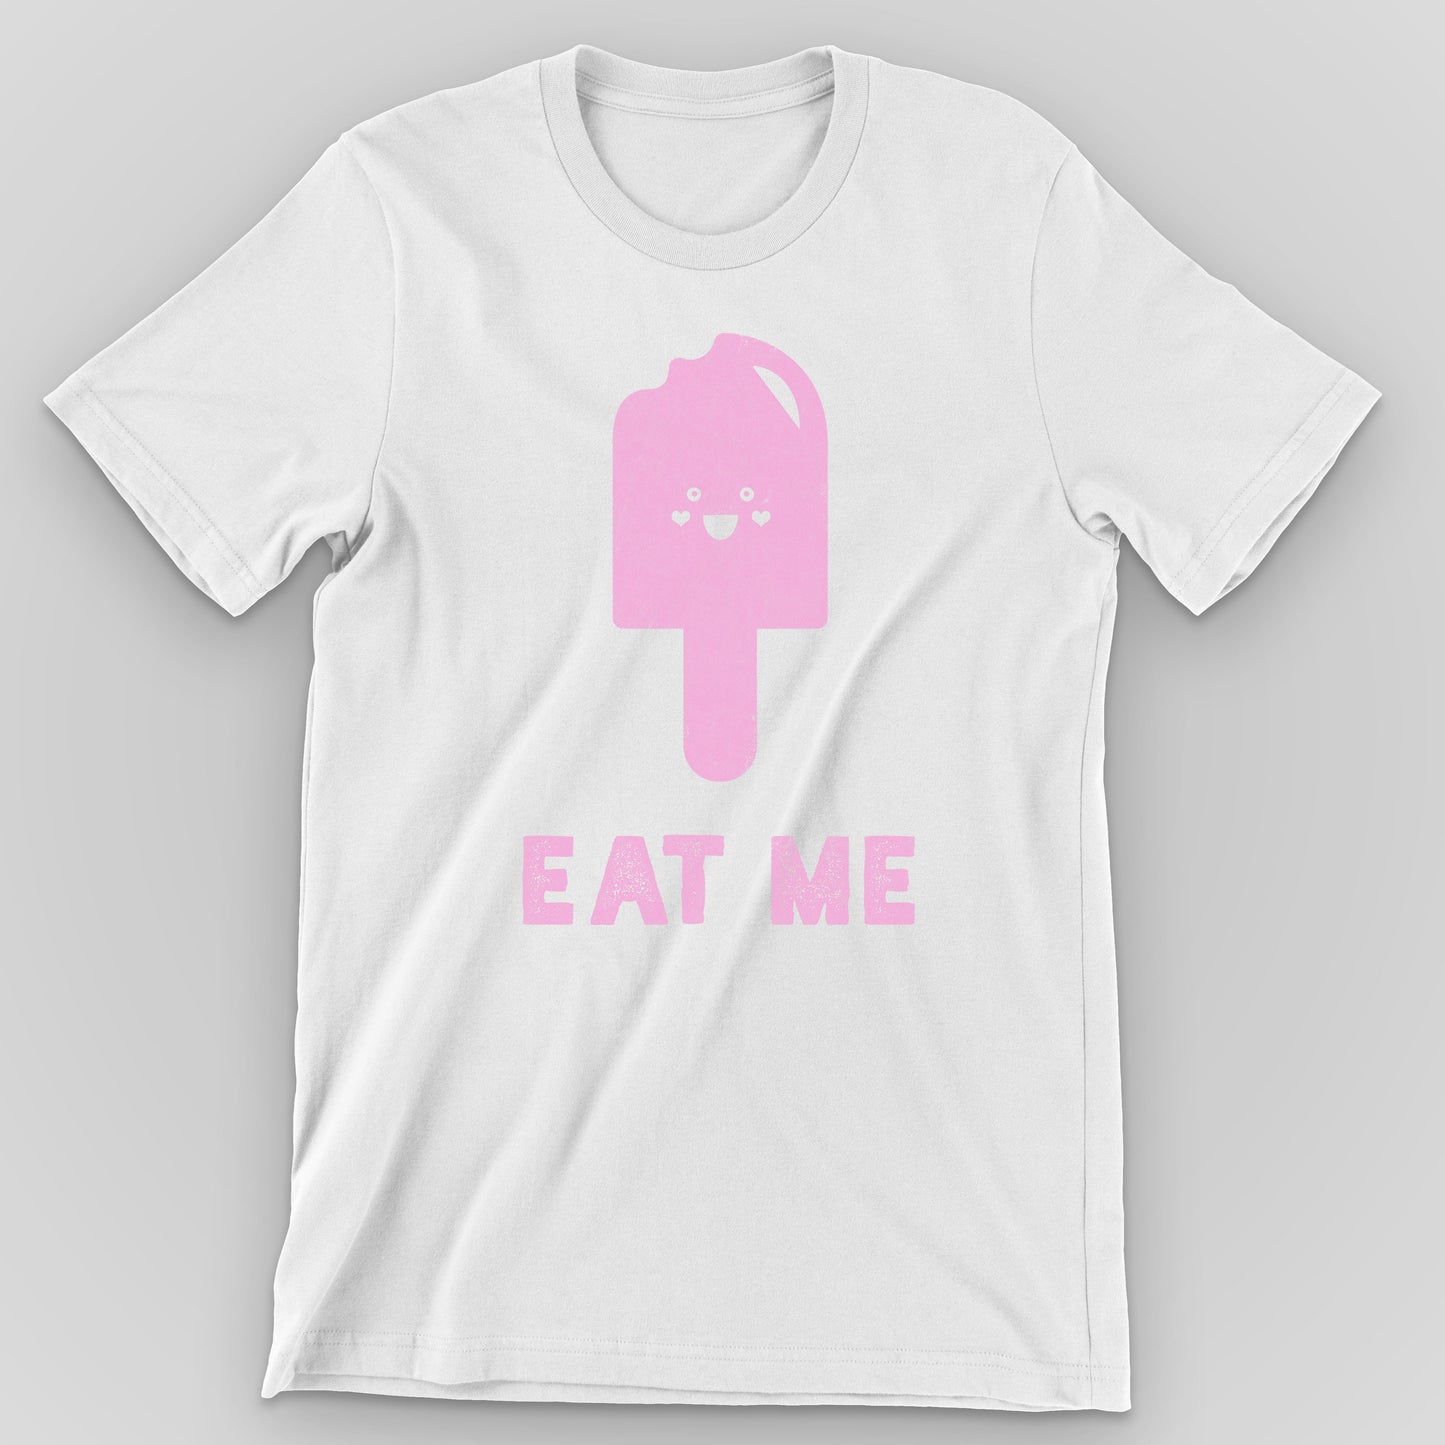 White Eat Me Graphic T-Shirt by Snaxtime